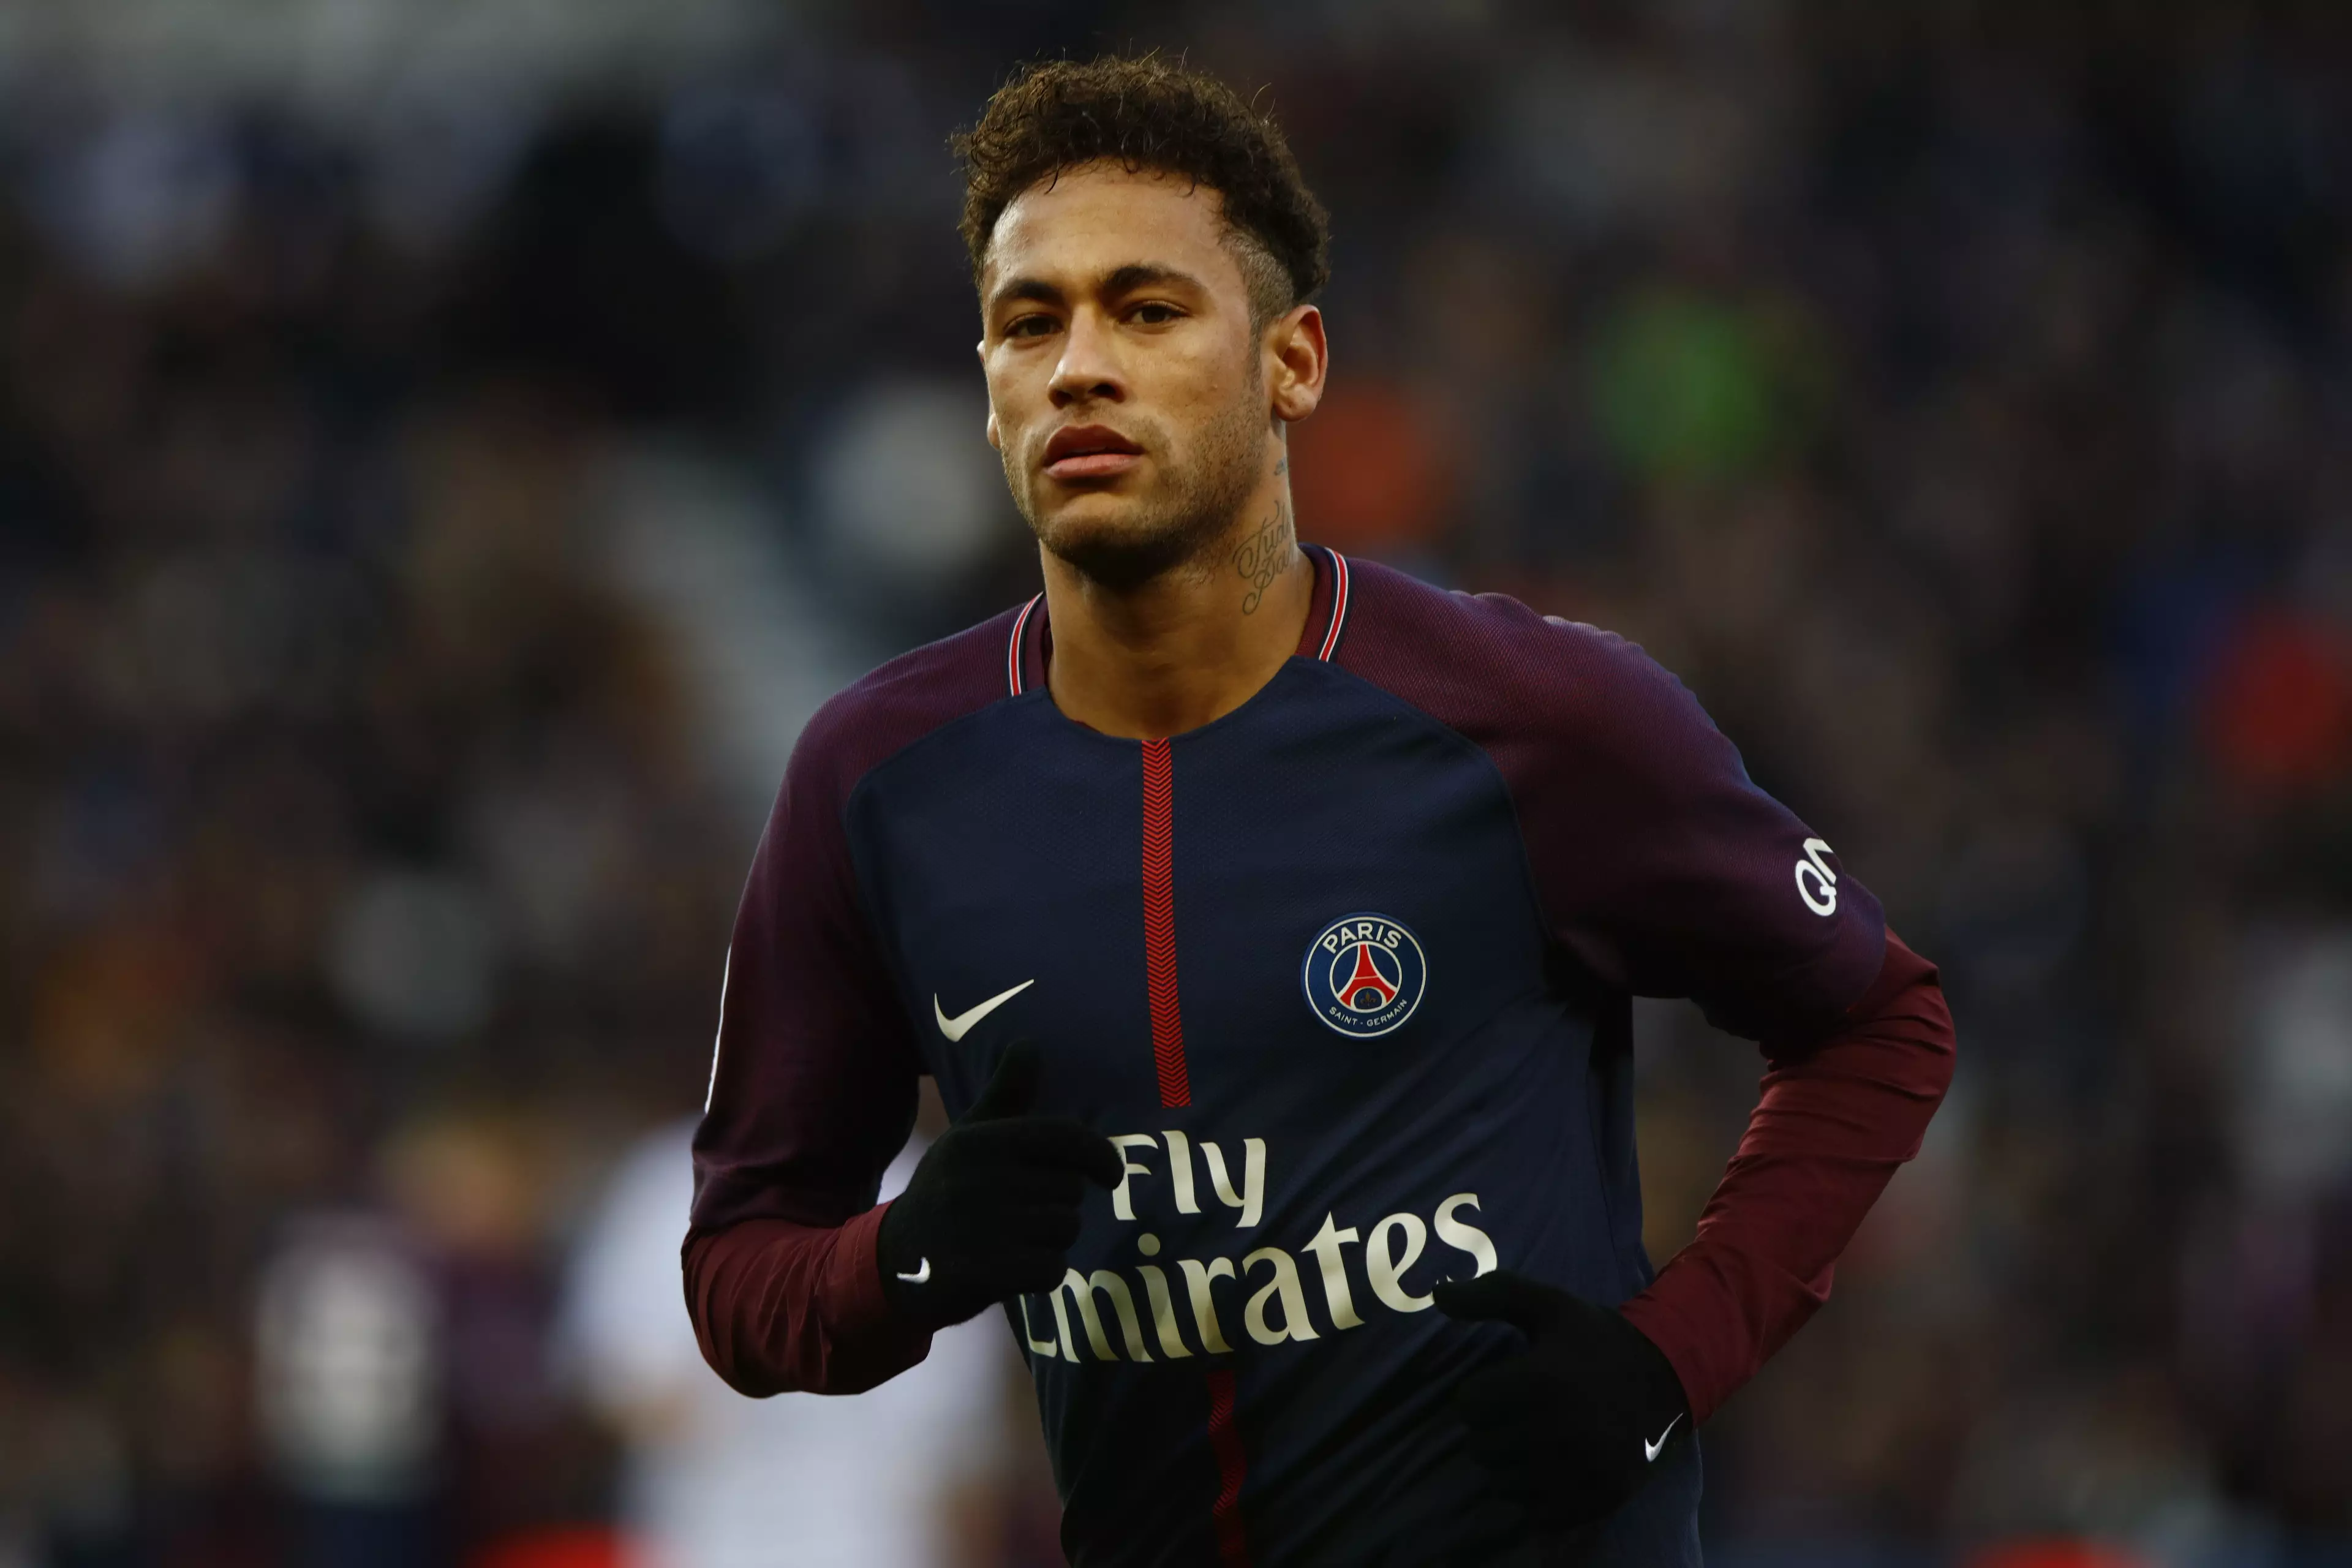 Neymar in action for PSG. Image: PA